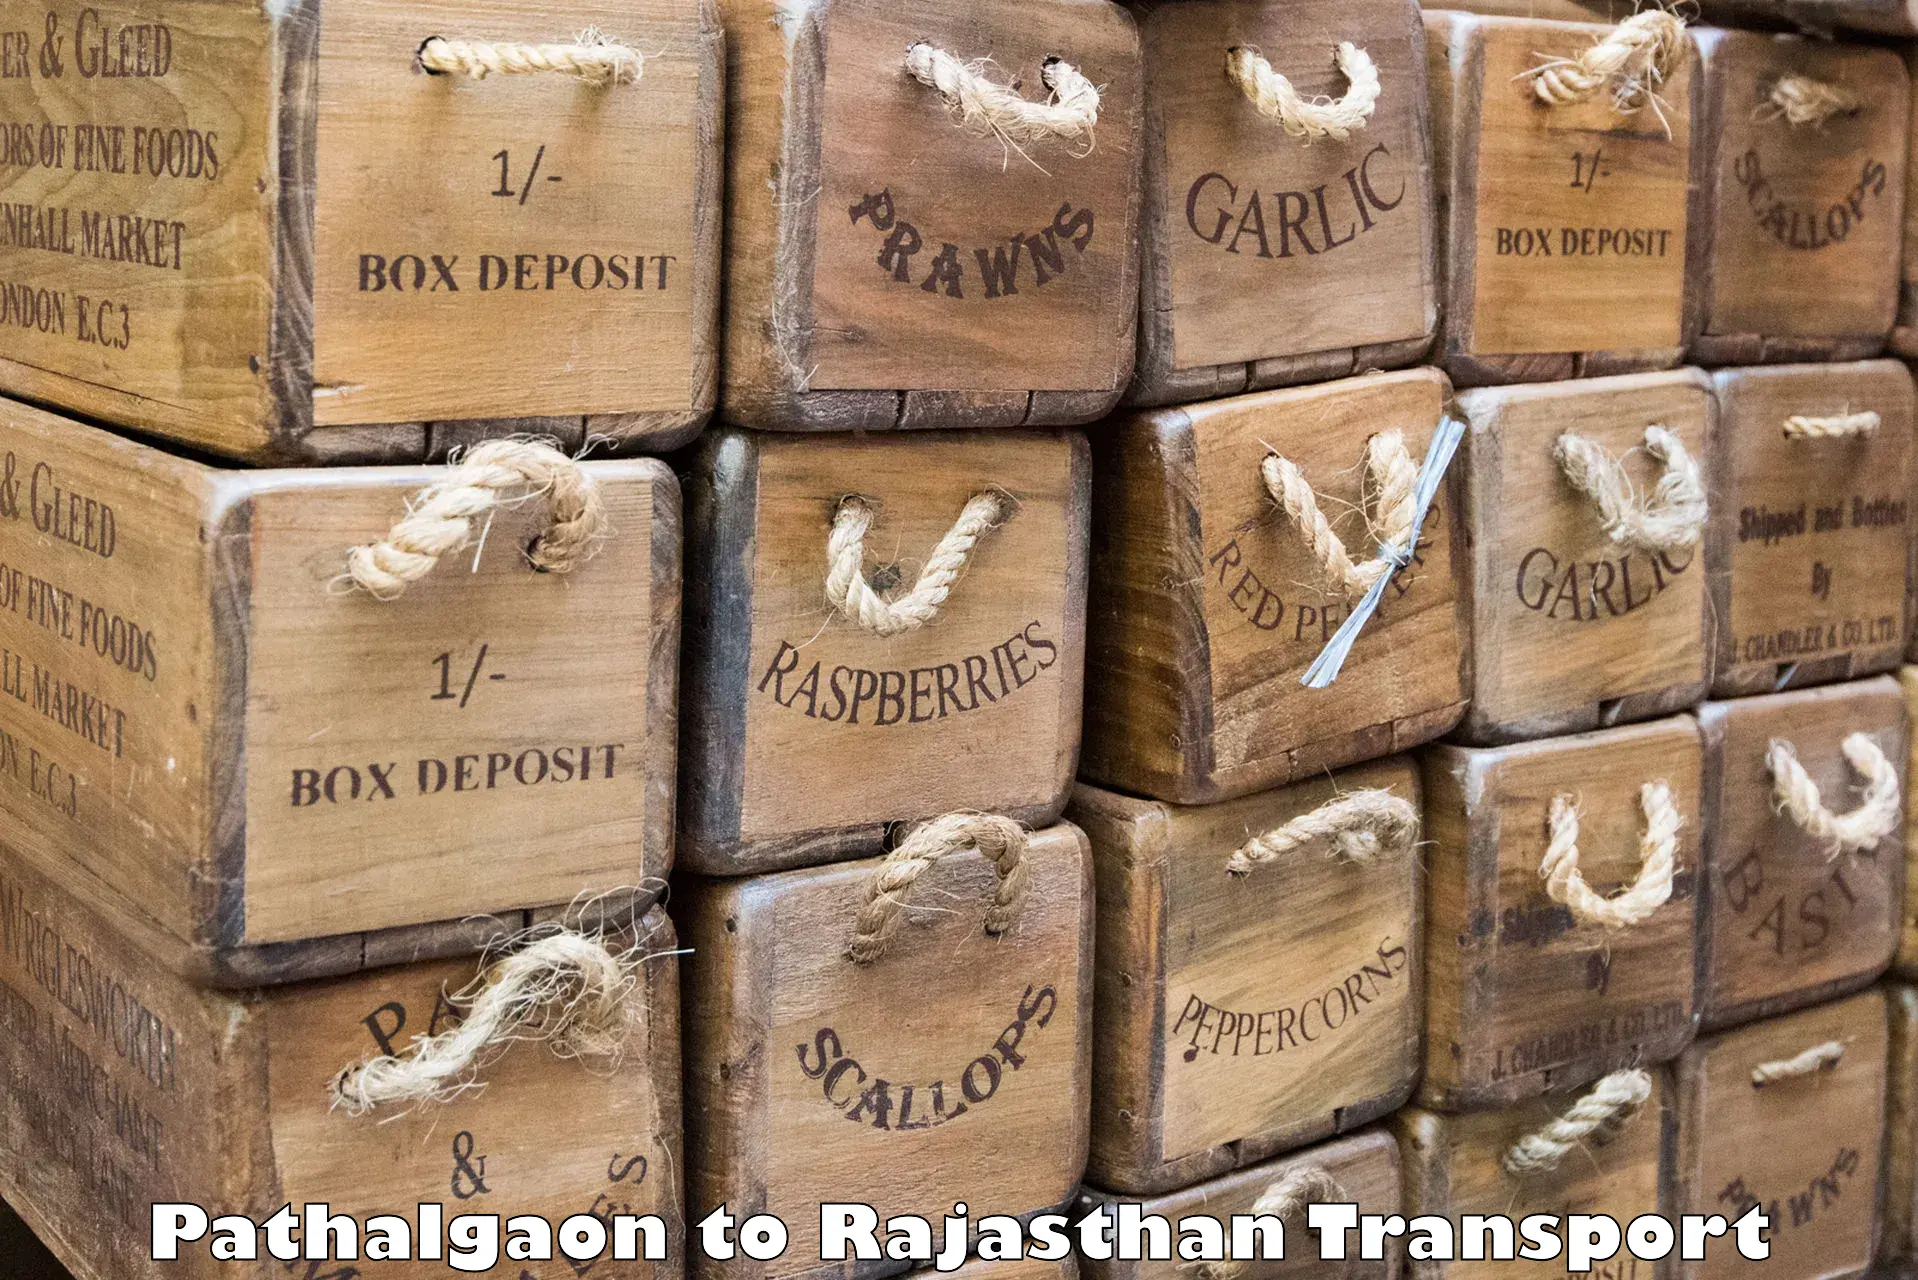 Container transport service Pathalgaon to Rajasthan